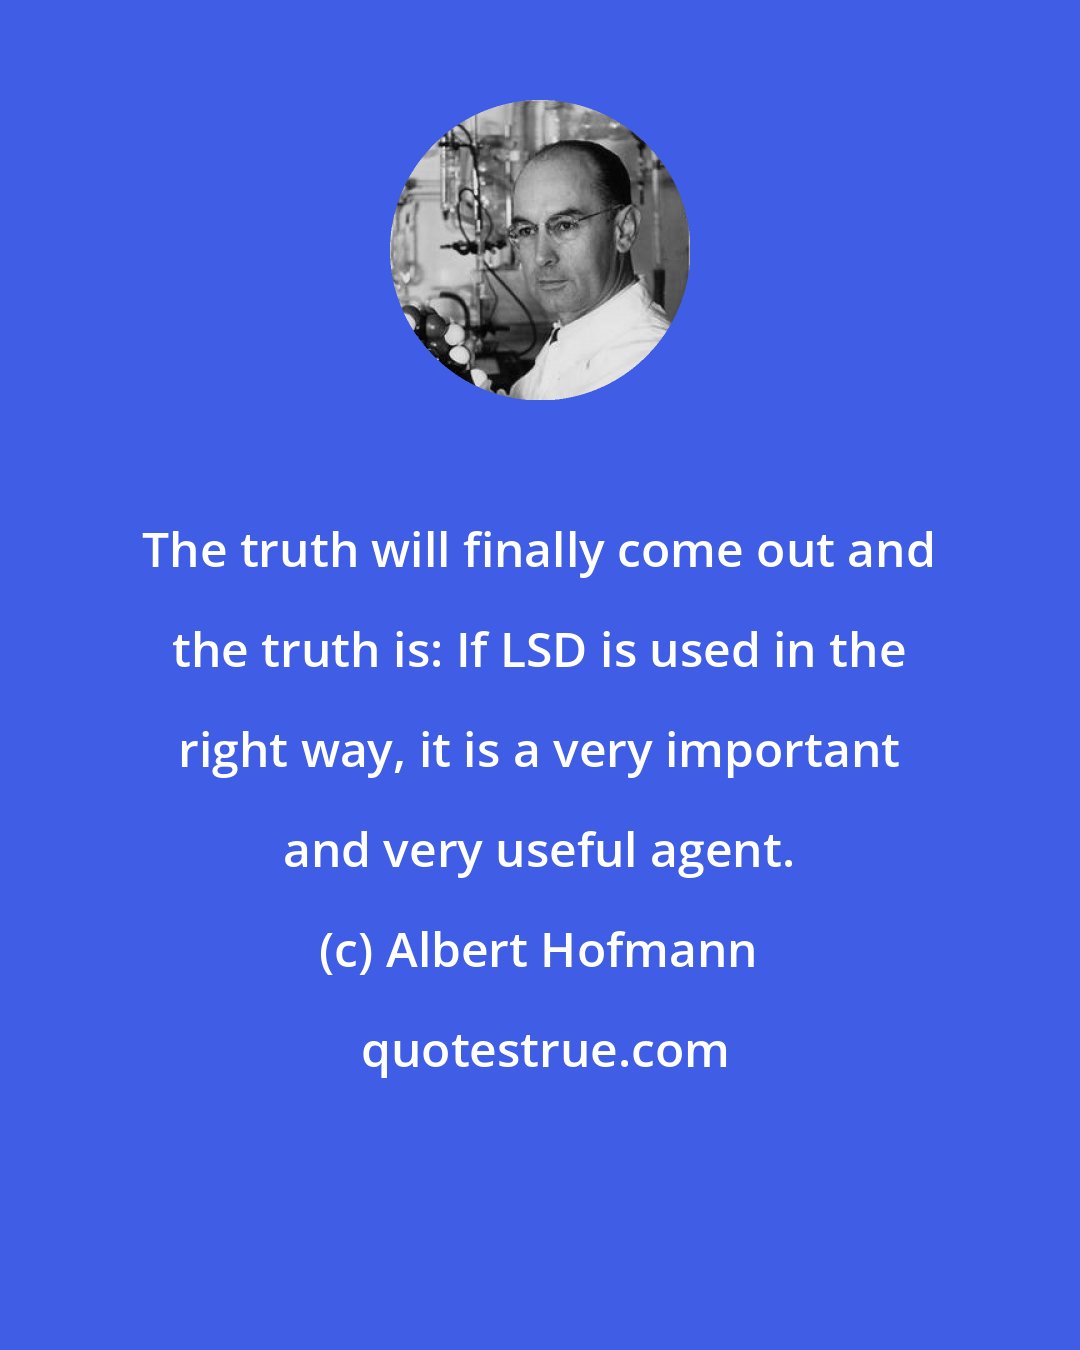 Albert Hofmann: The truth will finally come out and the truth is: If LSD is used in the right way, it is a very important and very useful agent.